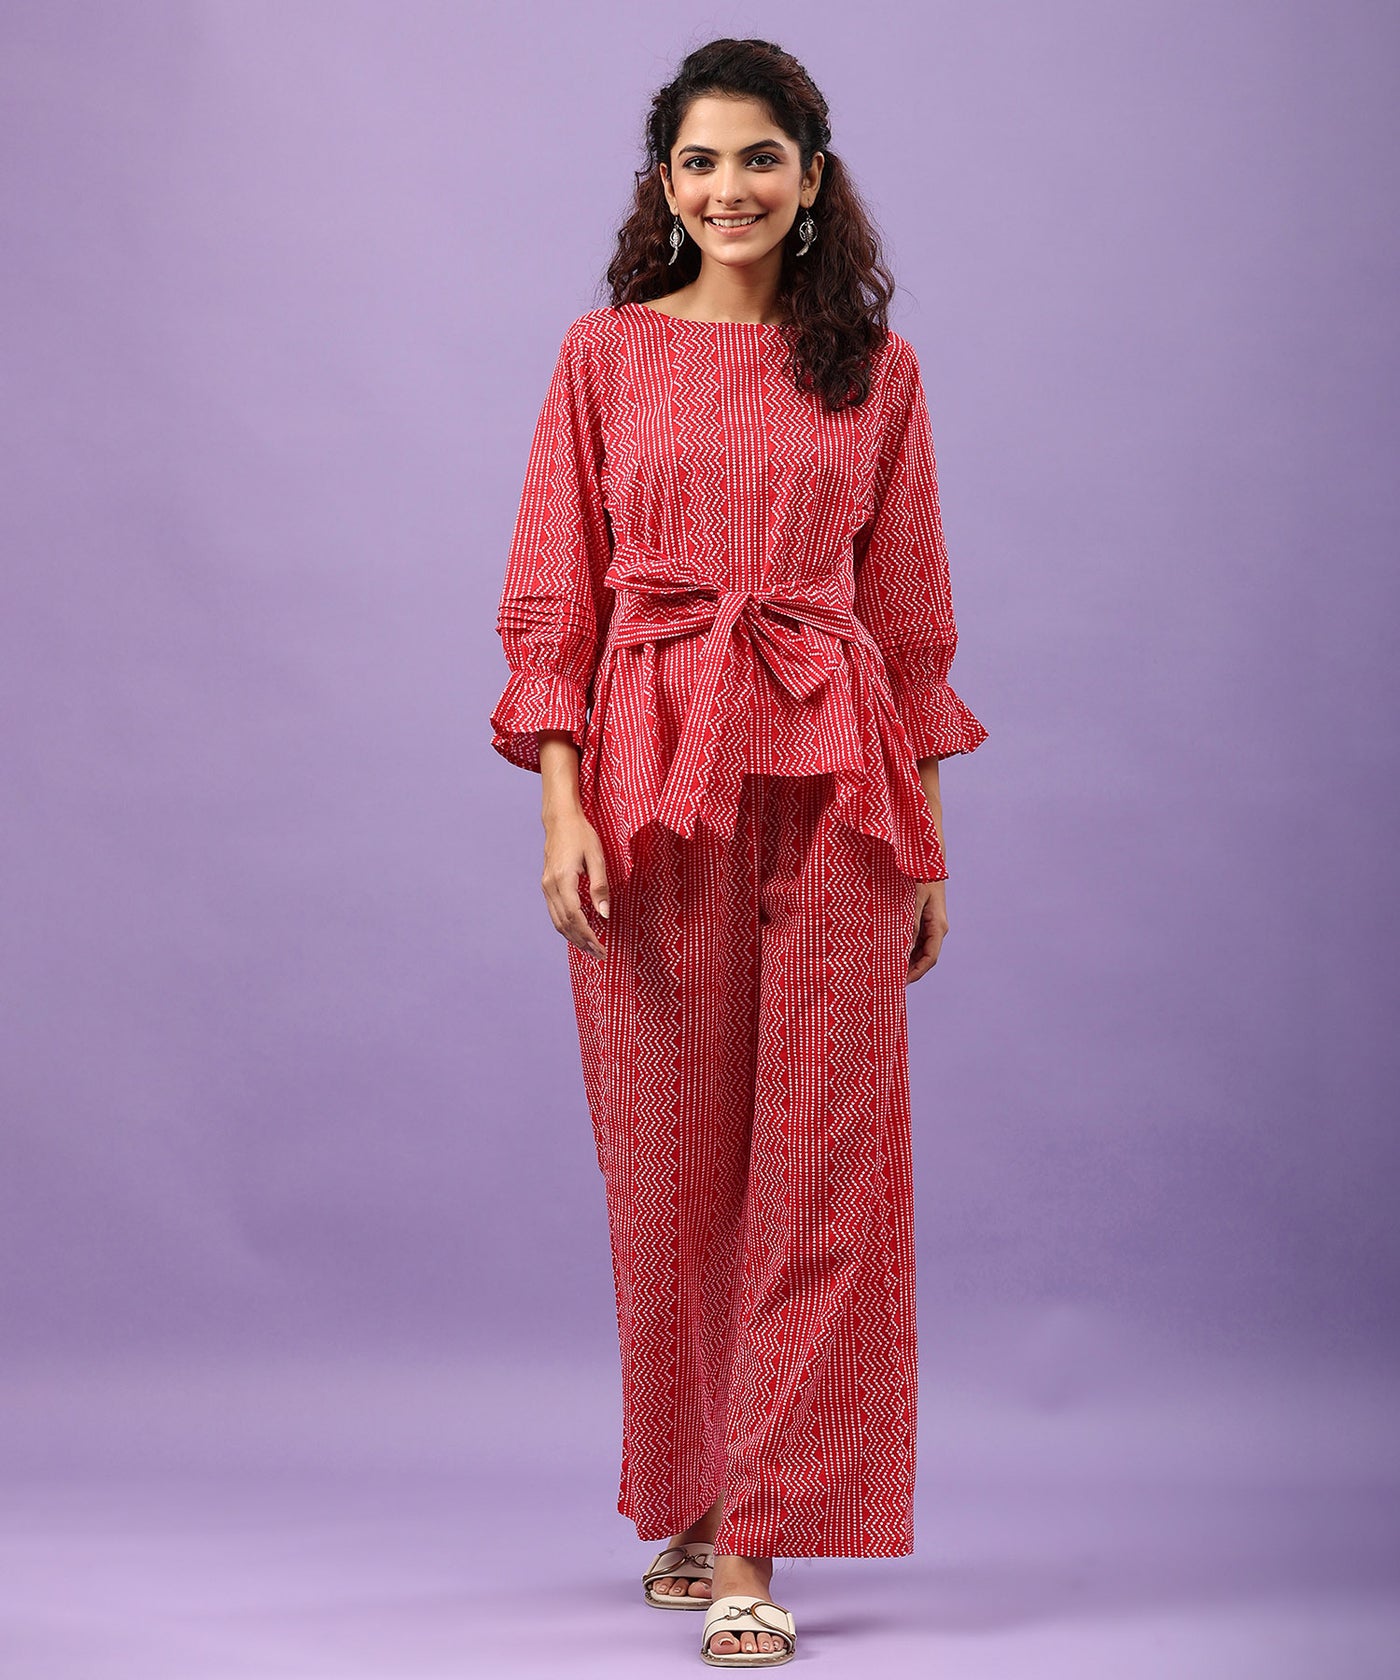 Zigzag Bhandej on Cotton Red Front Tie-up Co-ord Set